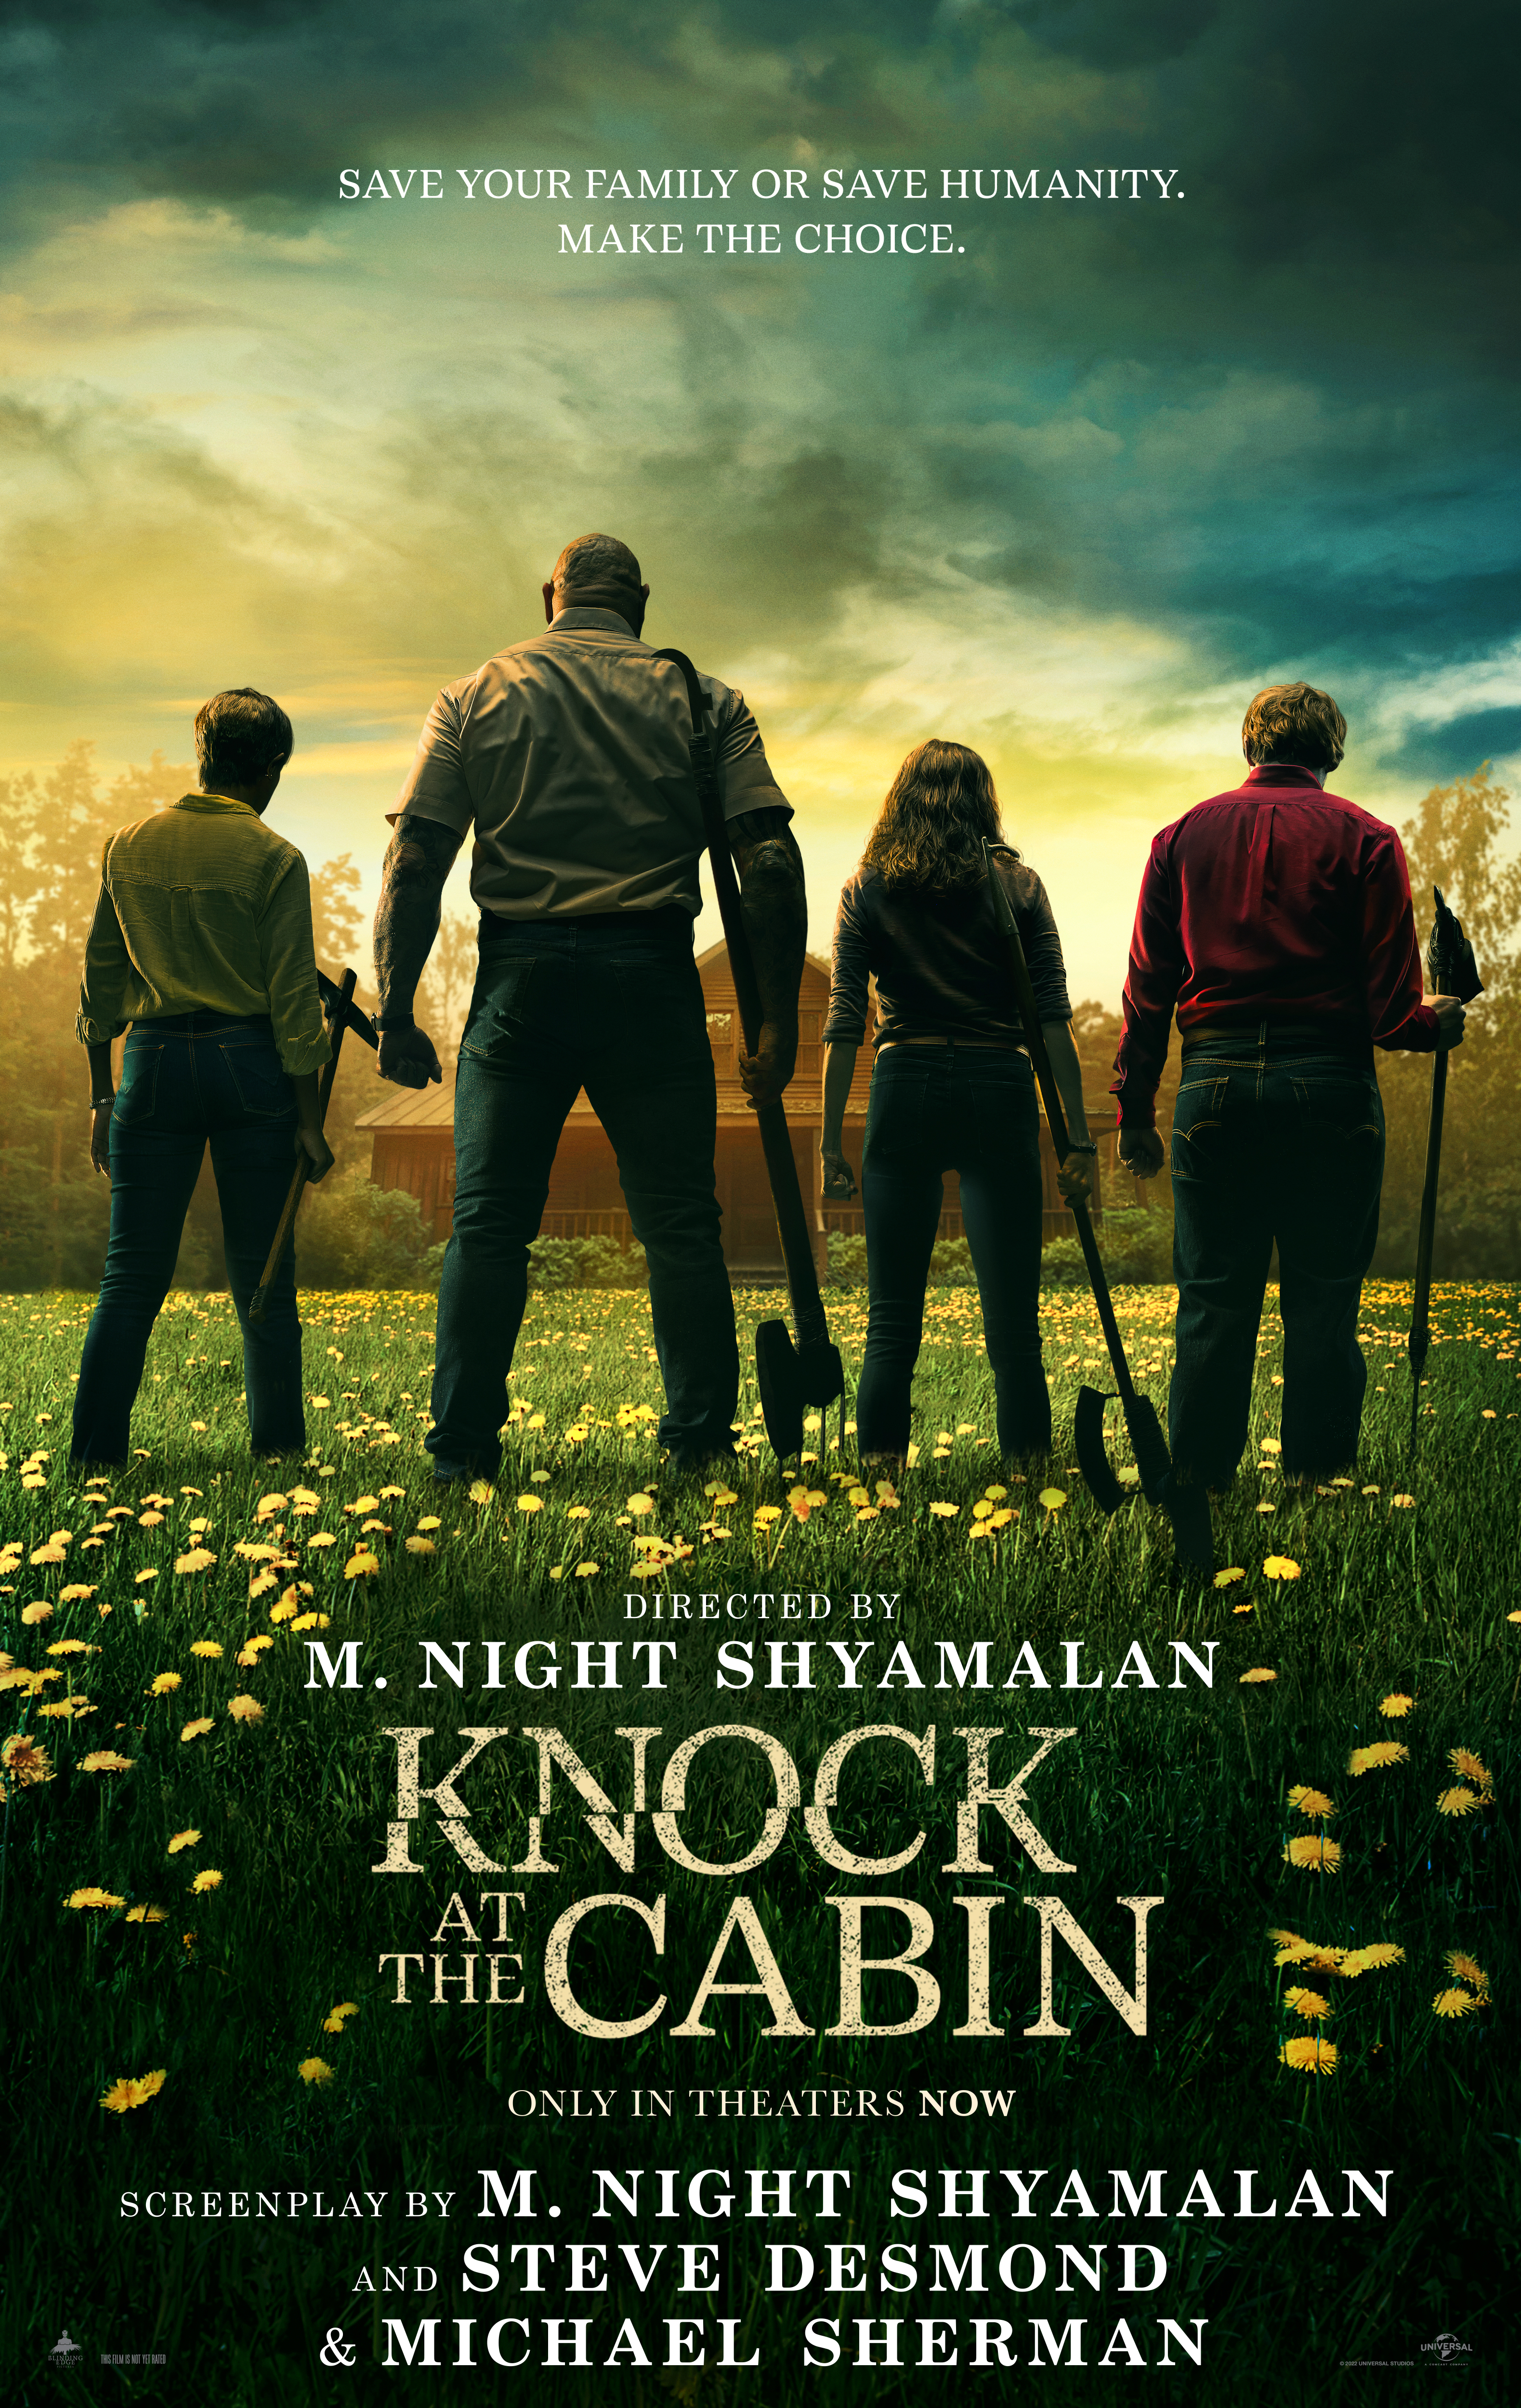 Knock at the Cabin Poster. In Theaters Now